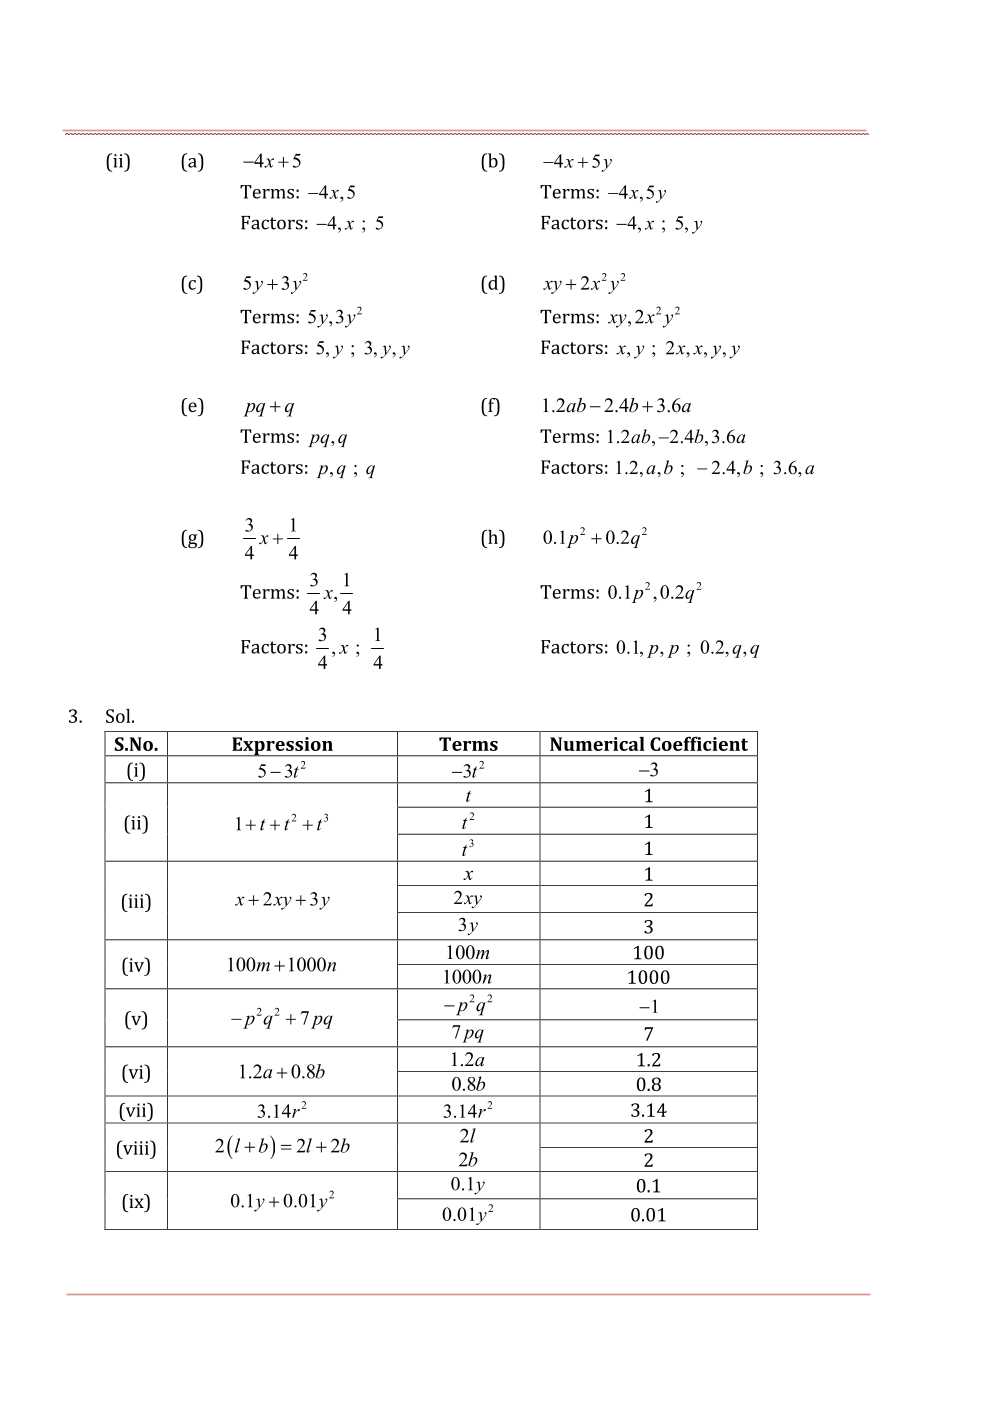 NCERT Solutions For Class 7 Maths Chapter 12 Algebraic Expressions